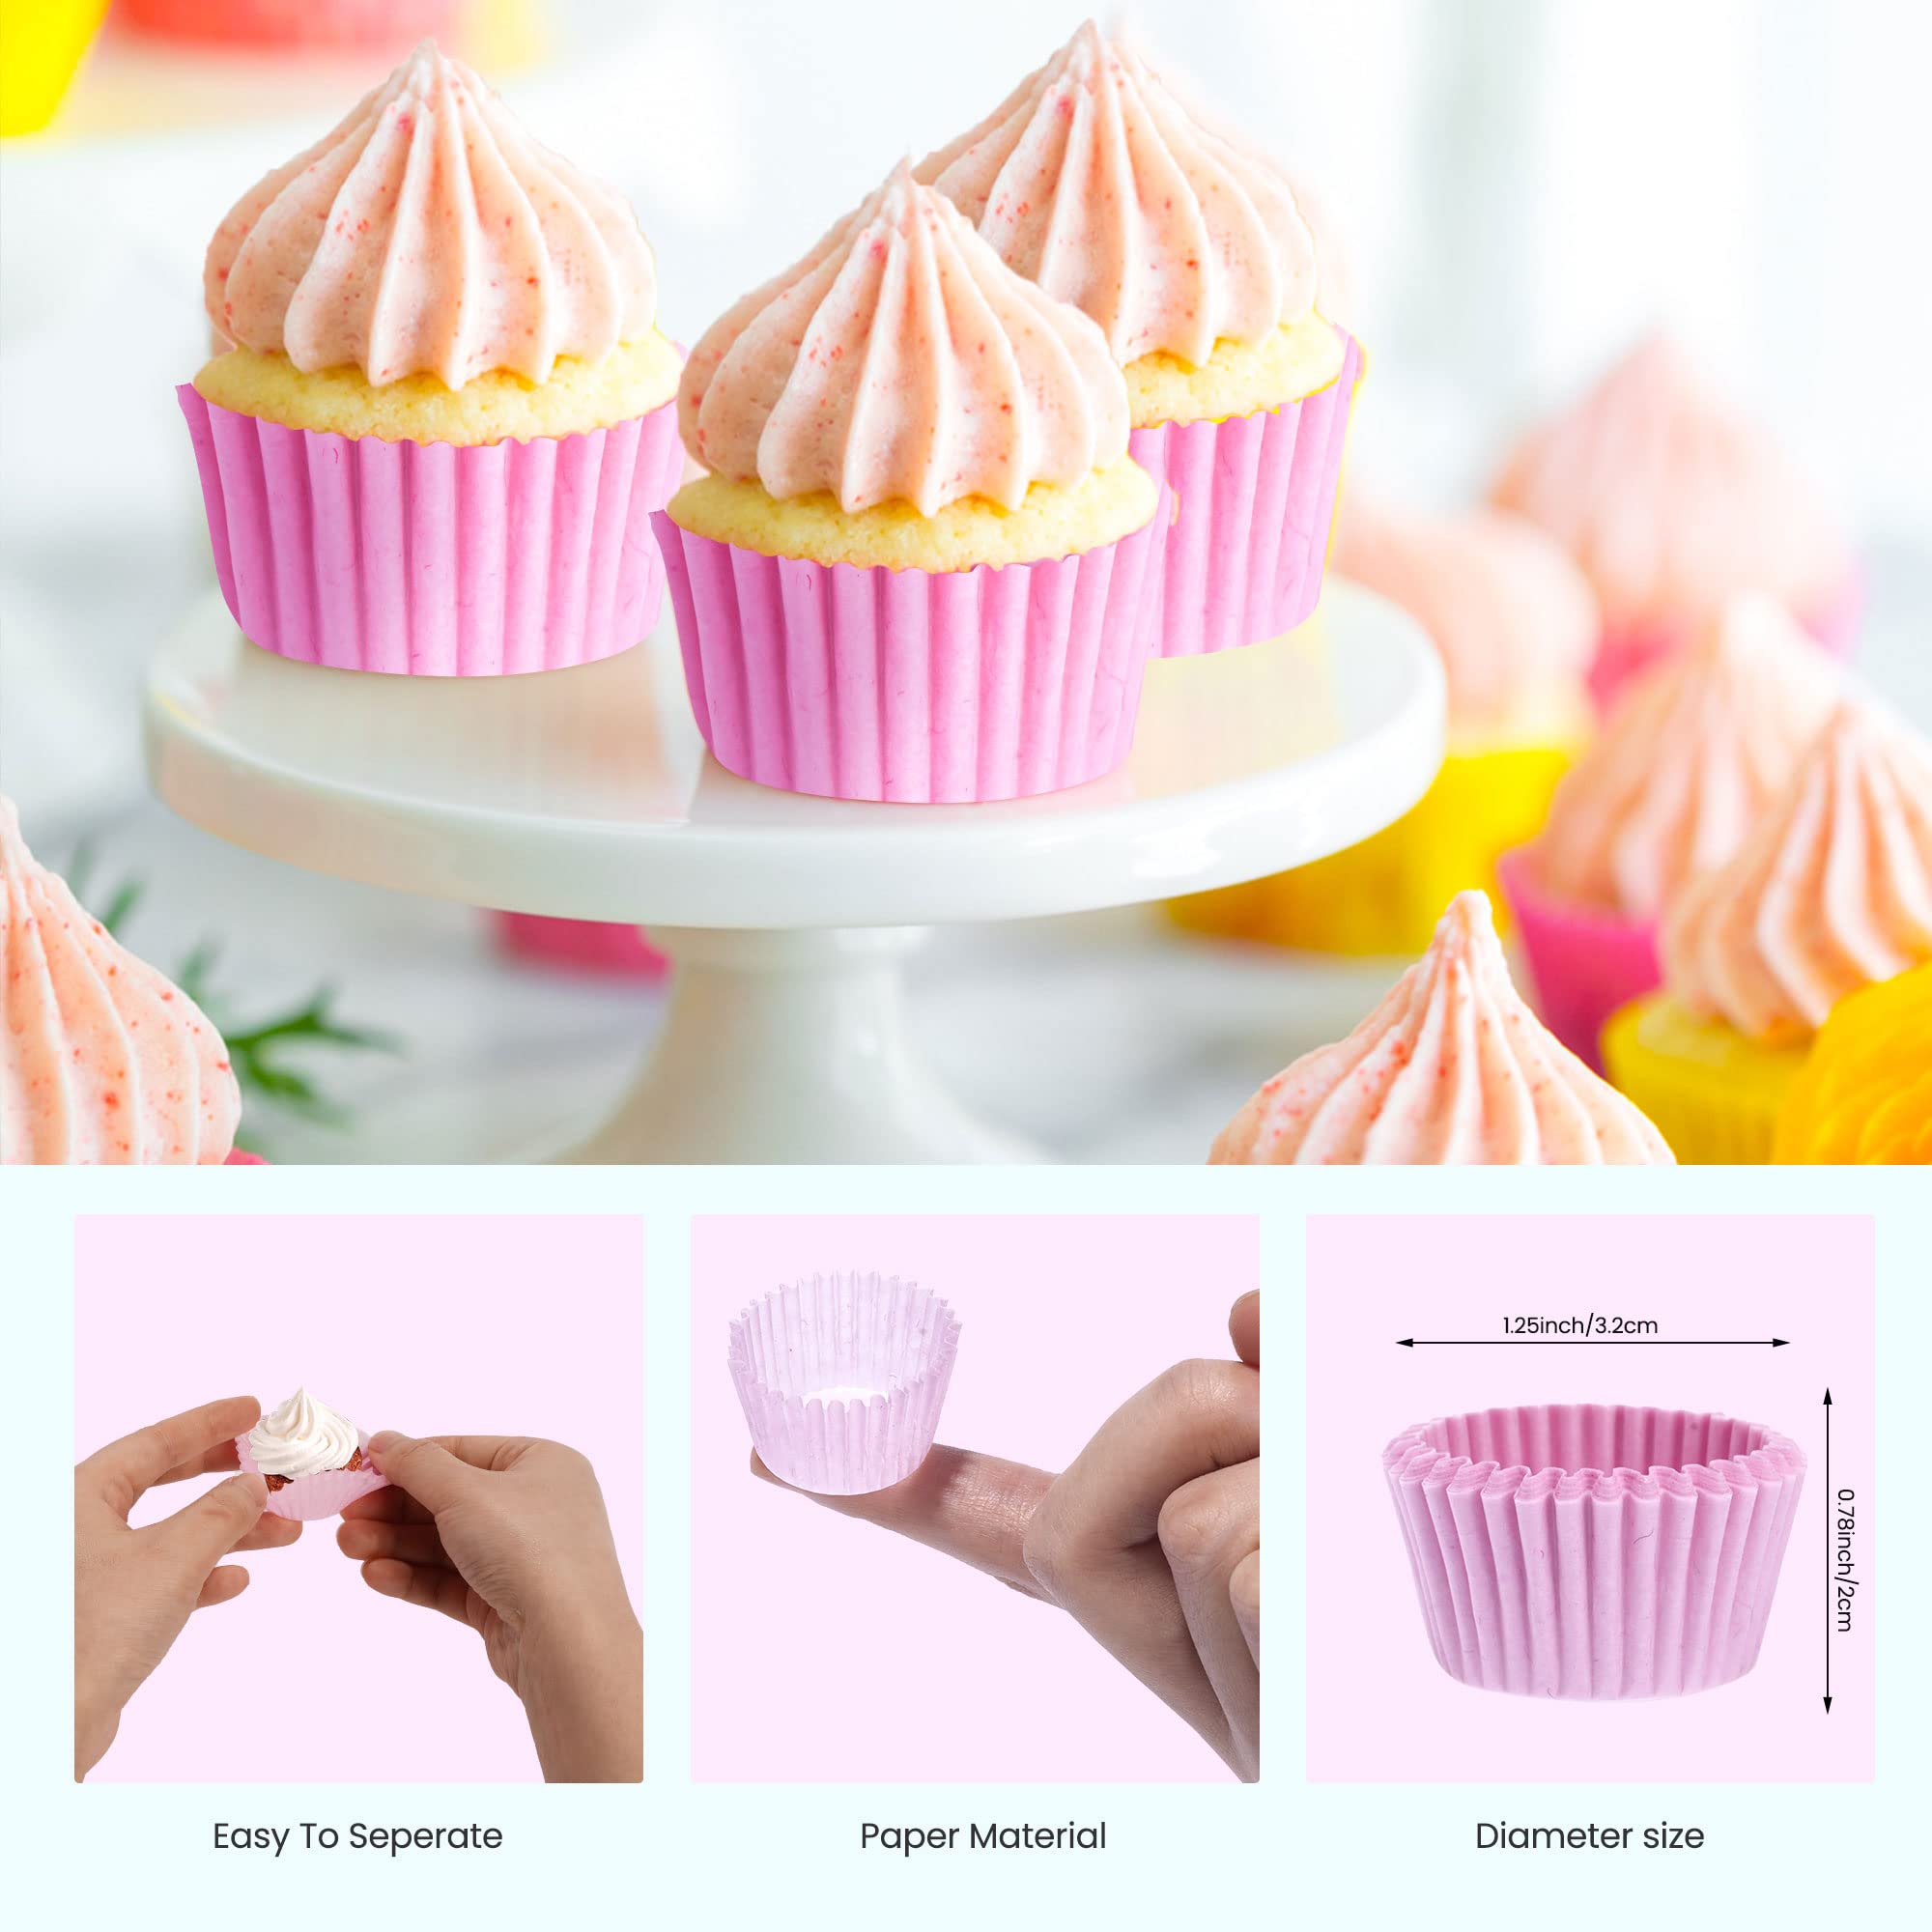 NUOMI 1 Inch Super Mini Cupcake papers Liners Baking Cups 1000 Pack Muffin Lining Wrappers, Pink